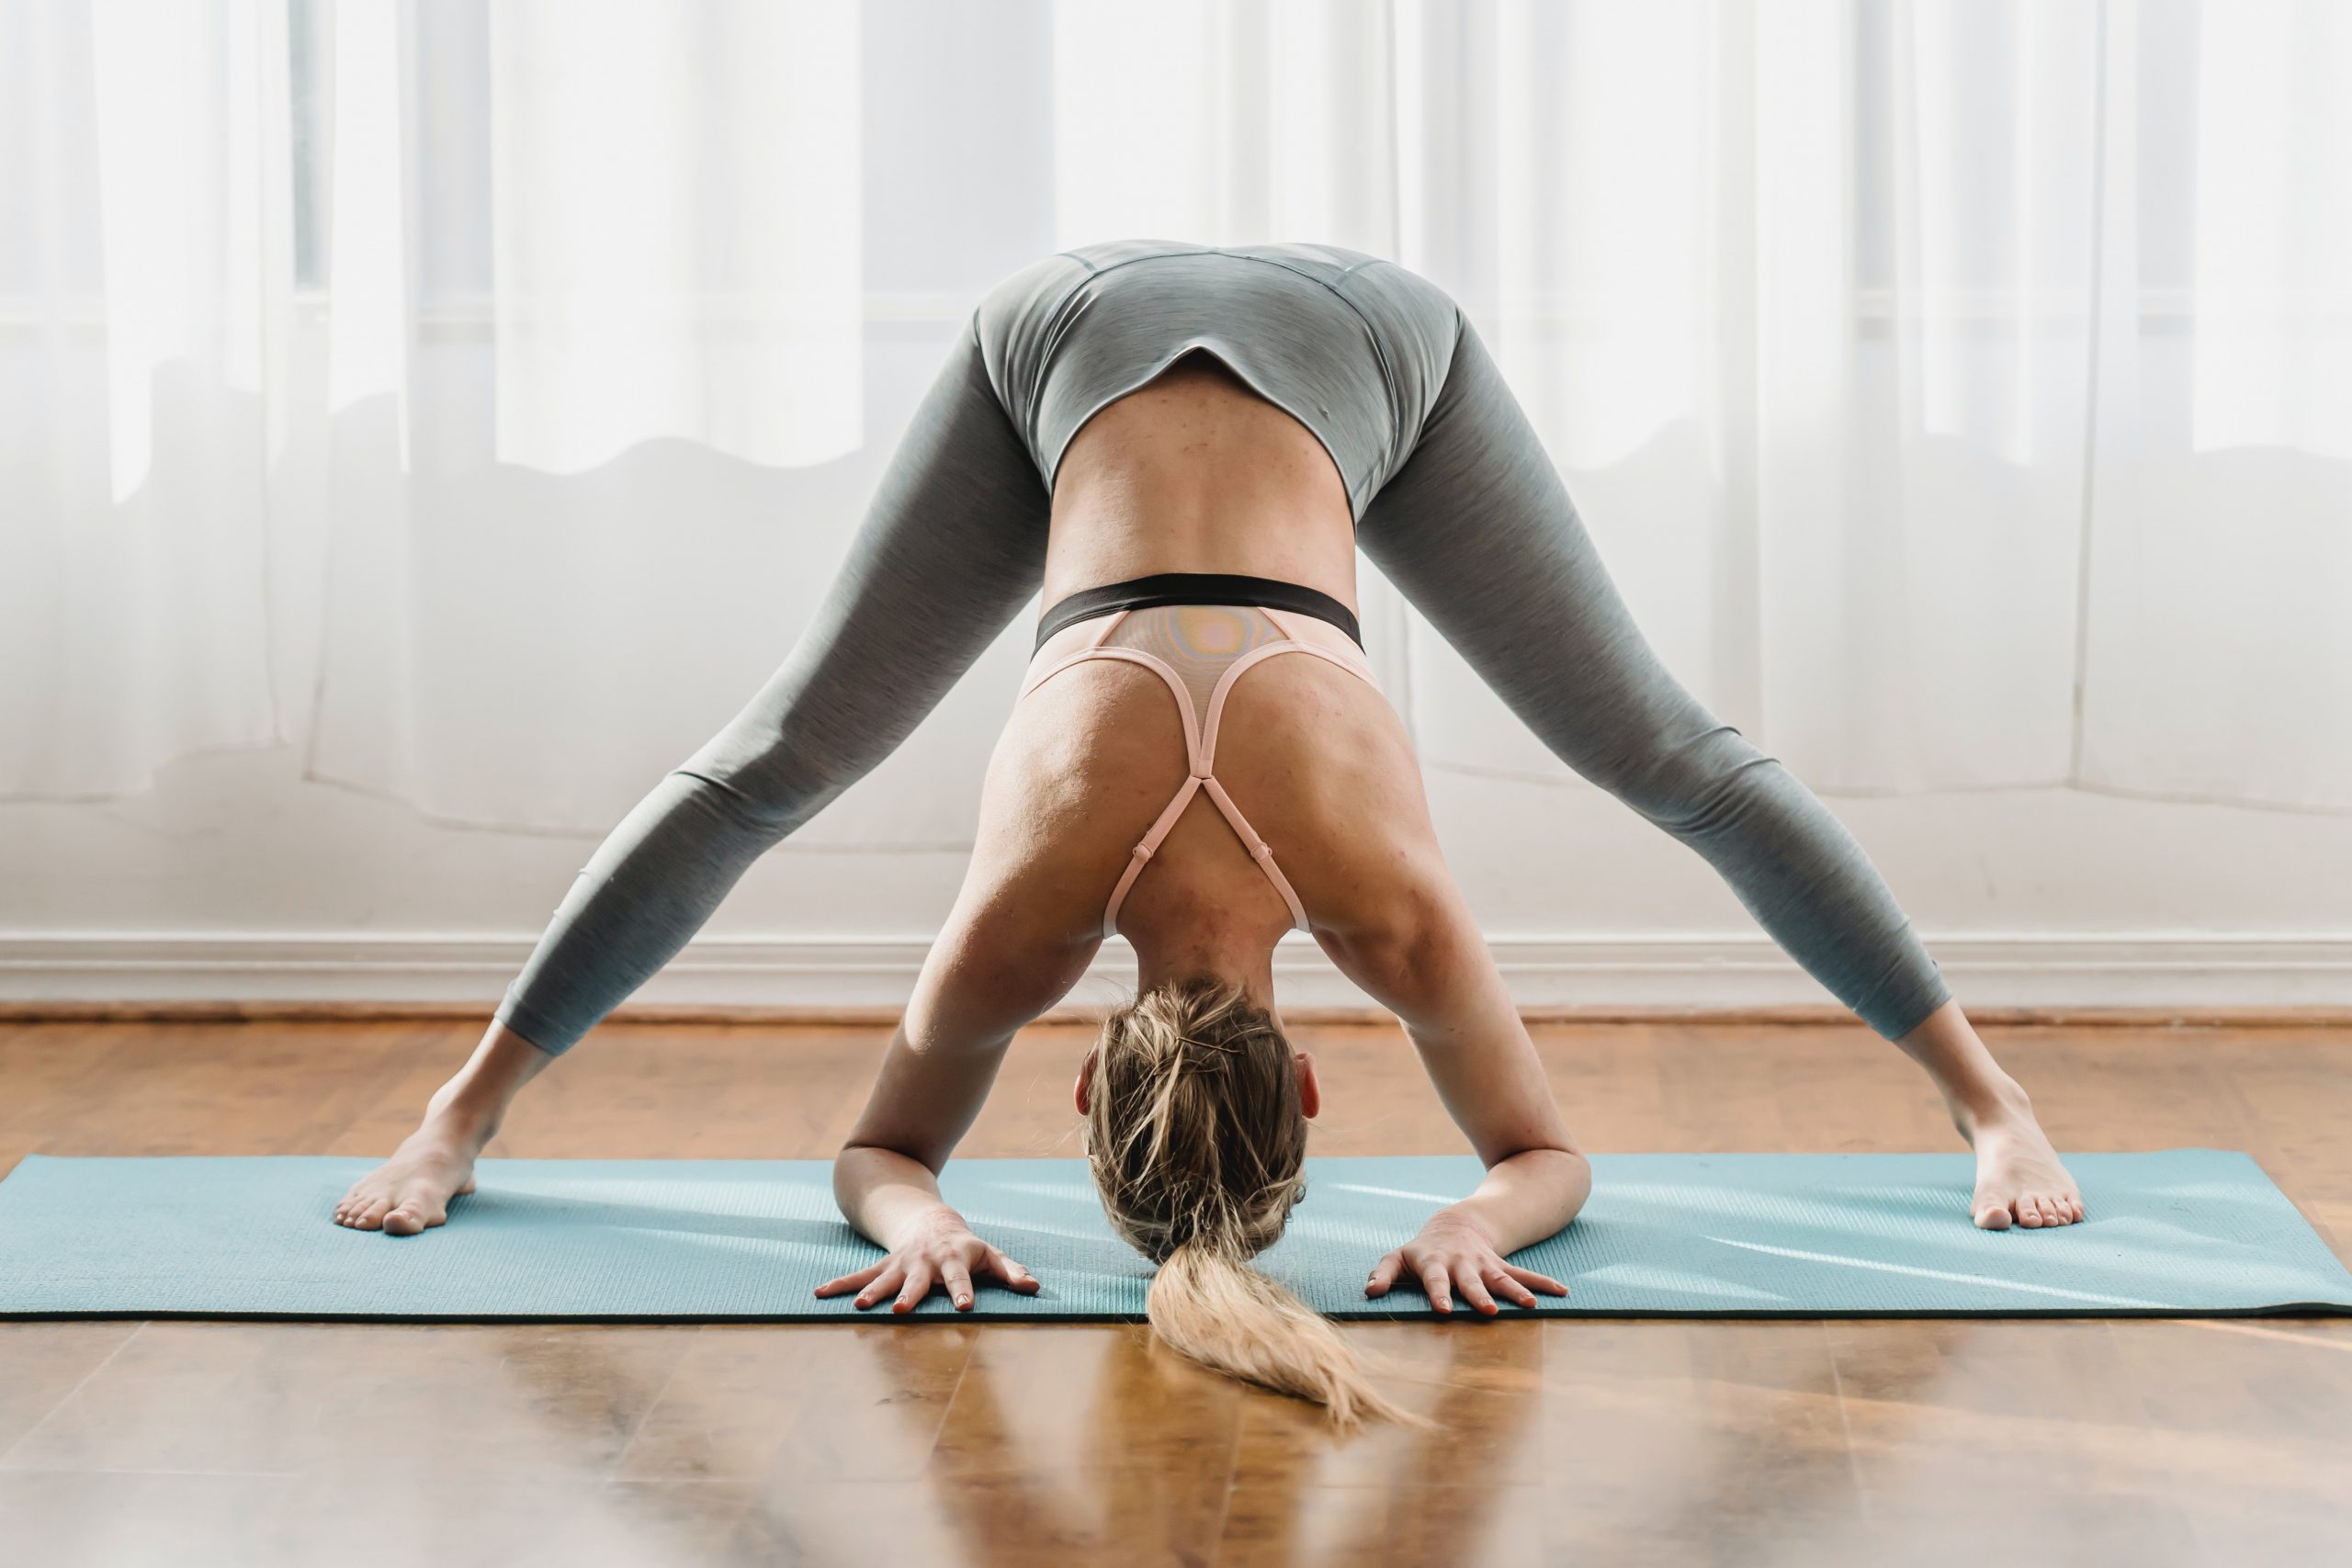 What To Consider Before Buying A Yoga Or Pilates Mat